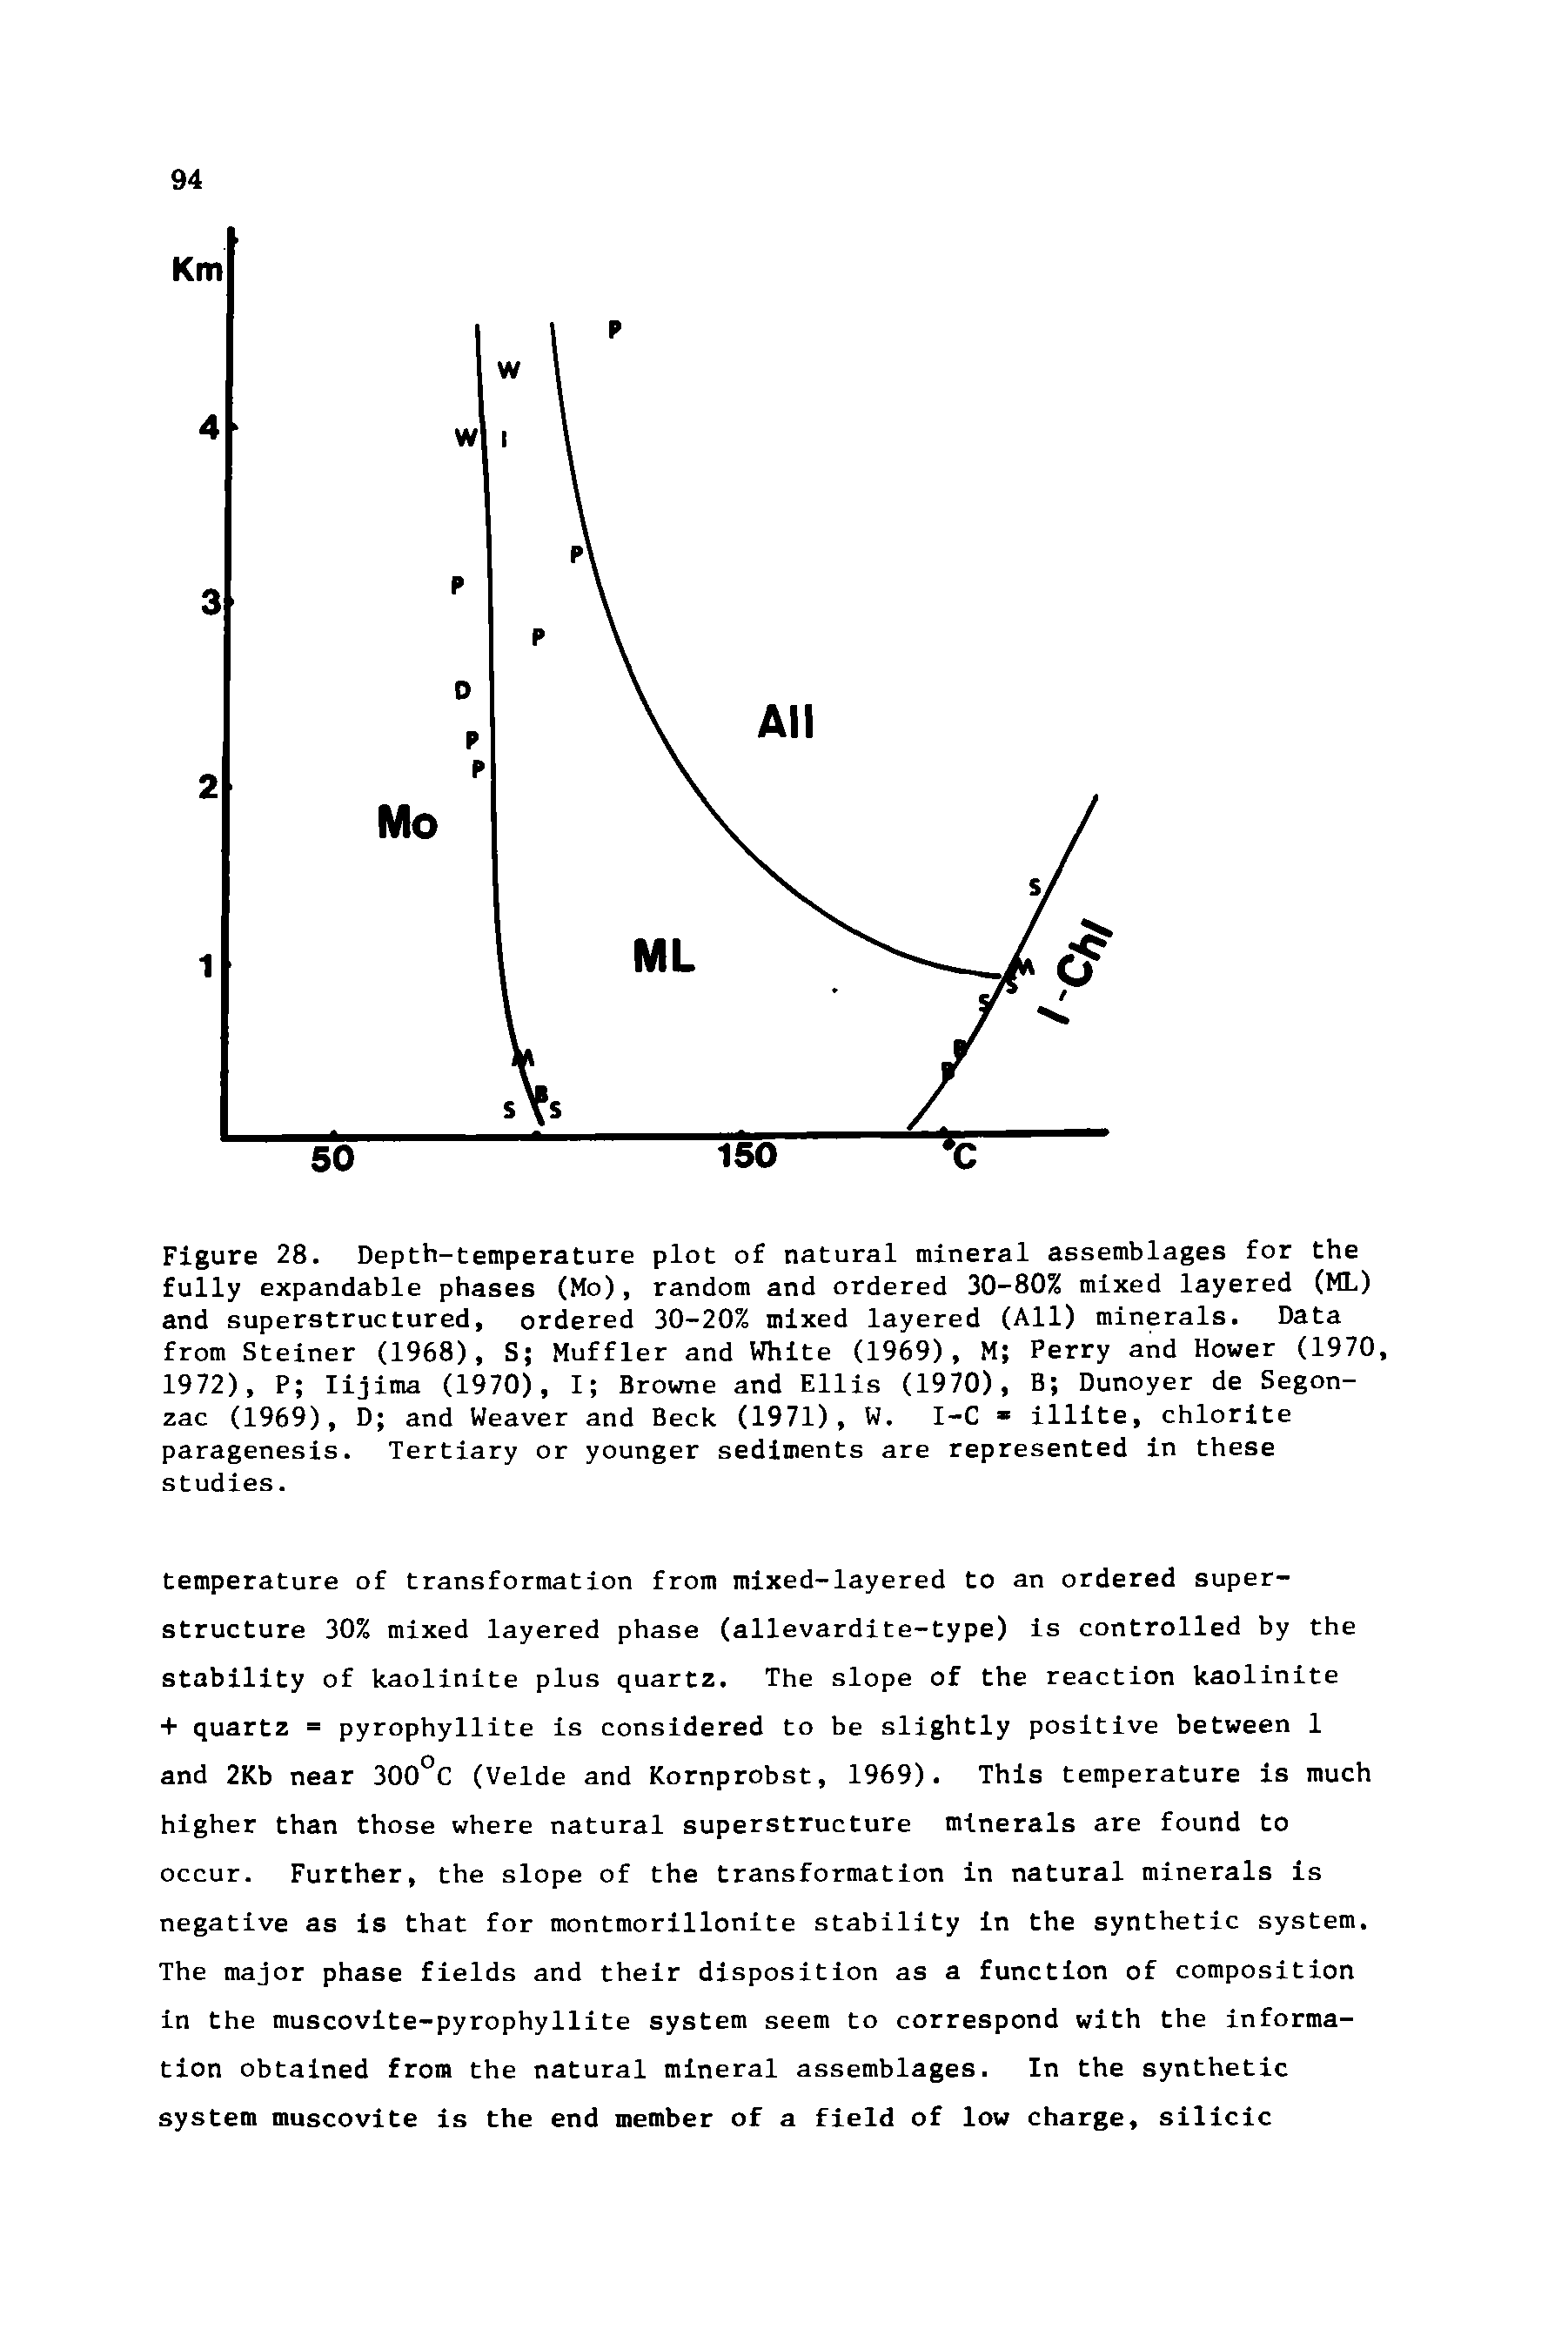 Figure 28. Depth-temperature plot of natural mineral assemblages for the fully expandable phases (Mo), random and ordered 30-80% mixed layered (ML) and superstructured, ordered 30-20% mixed layered (All) minerals. Data from Steiner (1968), S Muffler and White (1969), M Perry and Hower (1970, 1972), P Iijima (1970), I Browne and Ellis (1970), B Dunoyer de Segon-zac (1969), D and Weaver and Beck (1971), W. I-C illite, chlorite paragenesis. Tertiary or younger sediments are represented in these studies.